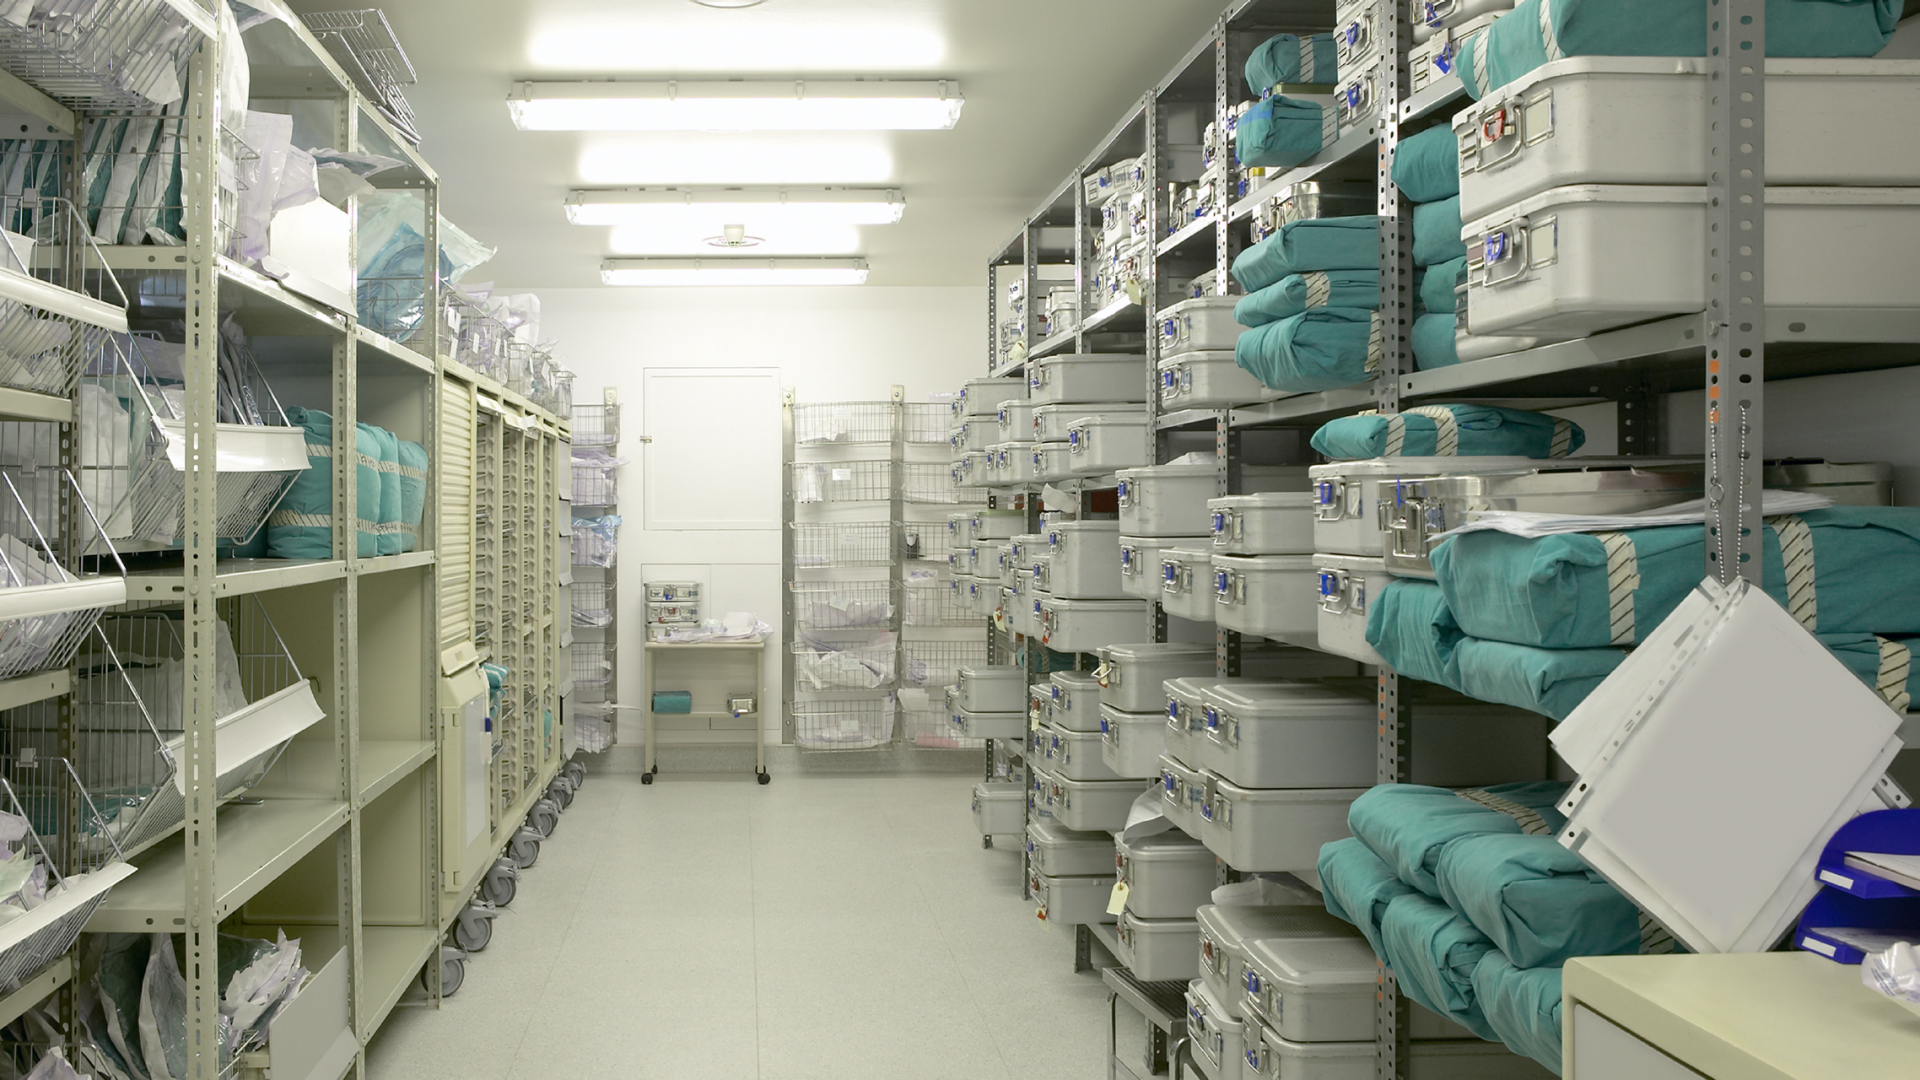 Hospital storage room with medical supplies